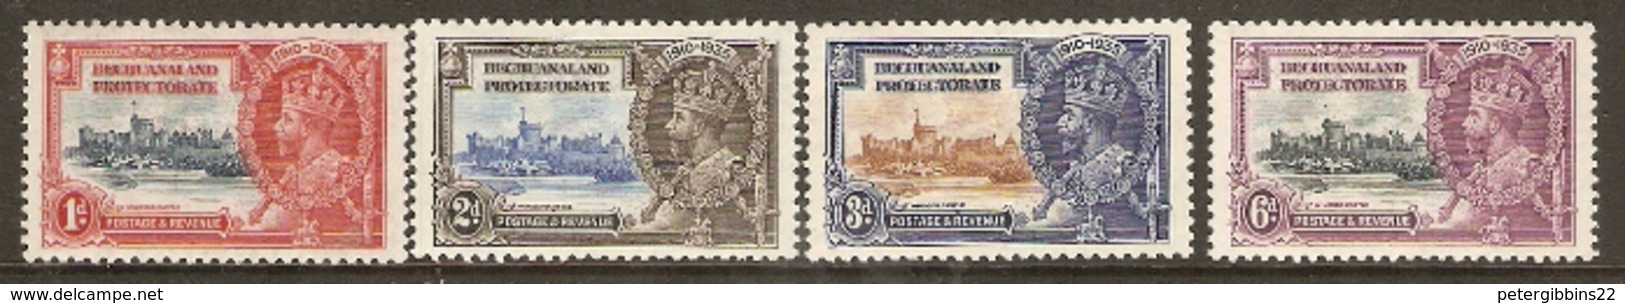 Bechuanaland Protectorate  1935  SG  11-14  Silver Jubilee Lightly Mounted Mint - 1885-1964 Protectorado De Bechuanaland